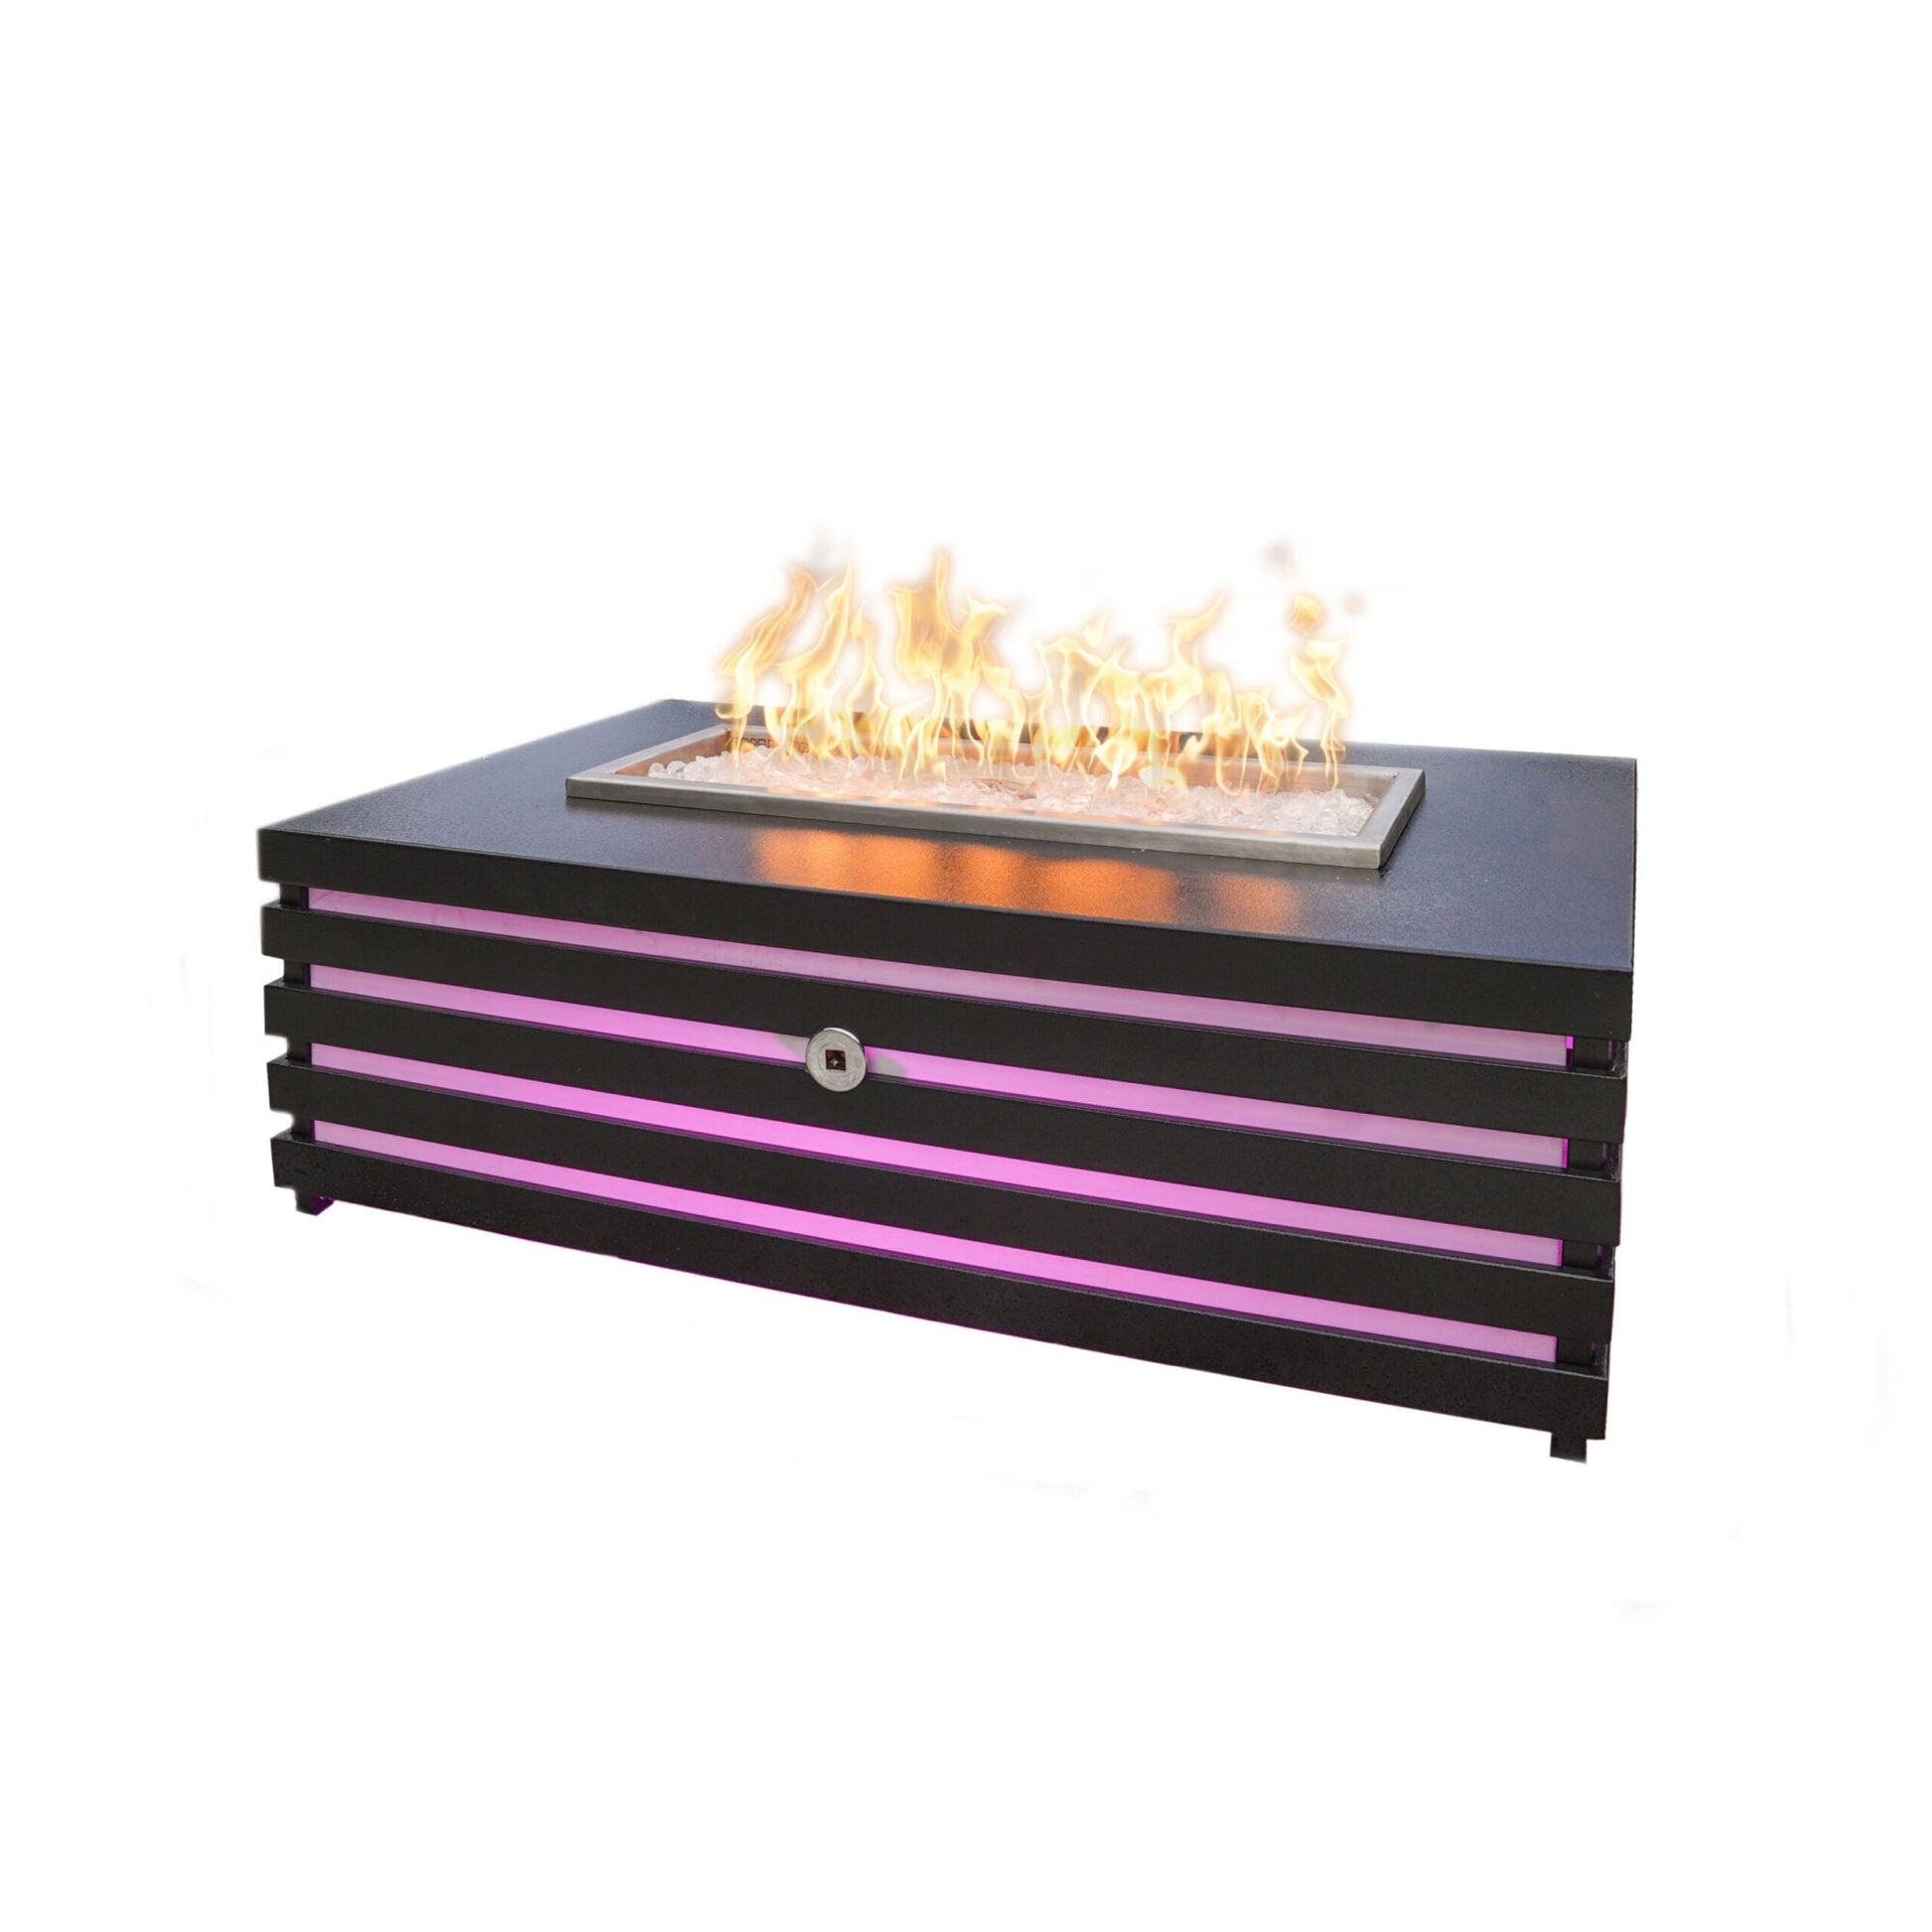 The Outdoor Plus Amina 60" Java Powder Coated Liquid Propane Fire Pit with 12V Electronic Ignition